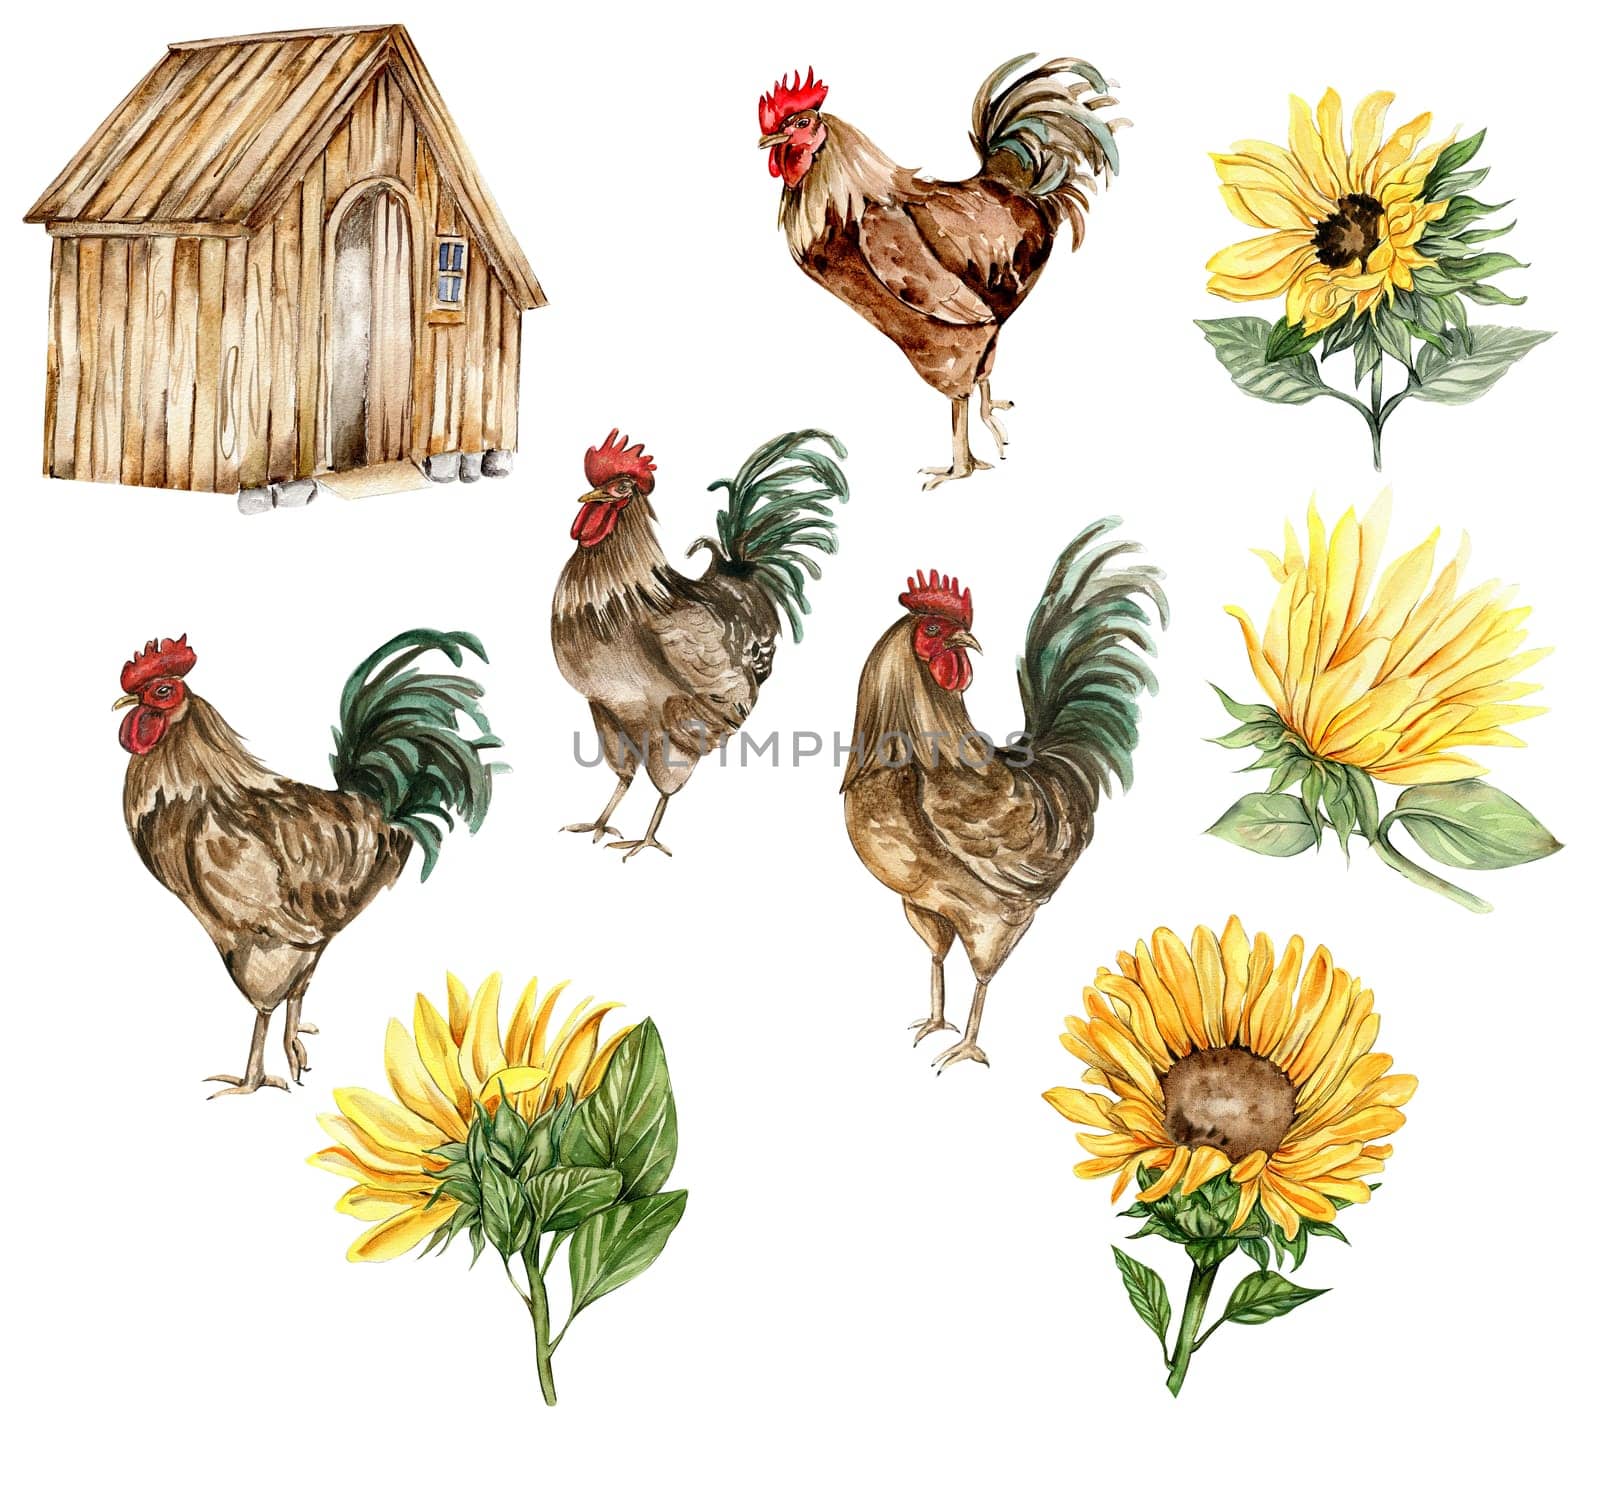 Watercolor wooden farmhouse. sunflowers and cock. Hand drawn illustration of a farm. Perfect for wedding invitation, greetings card, posters.